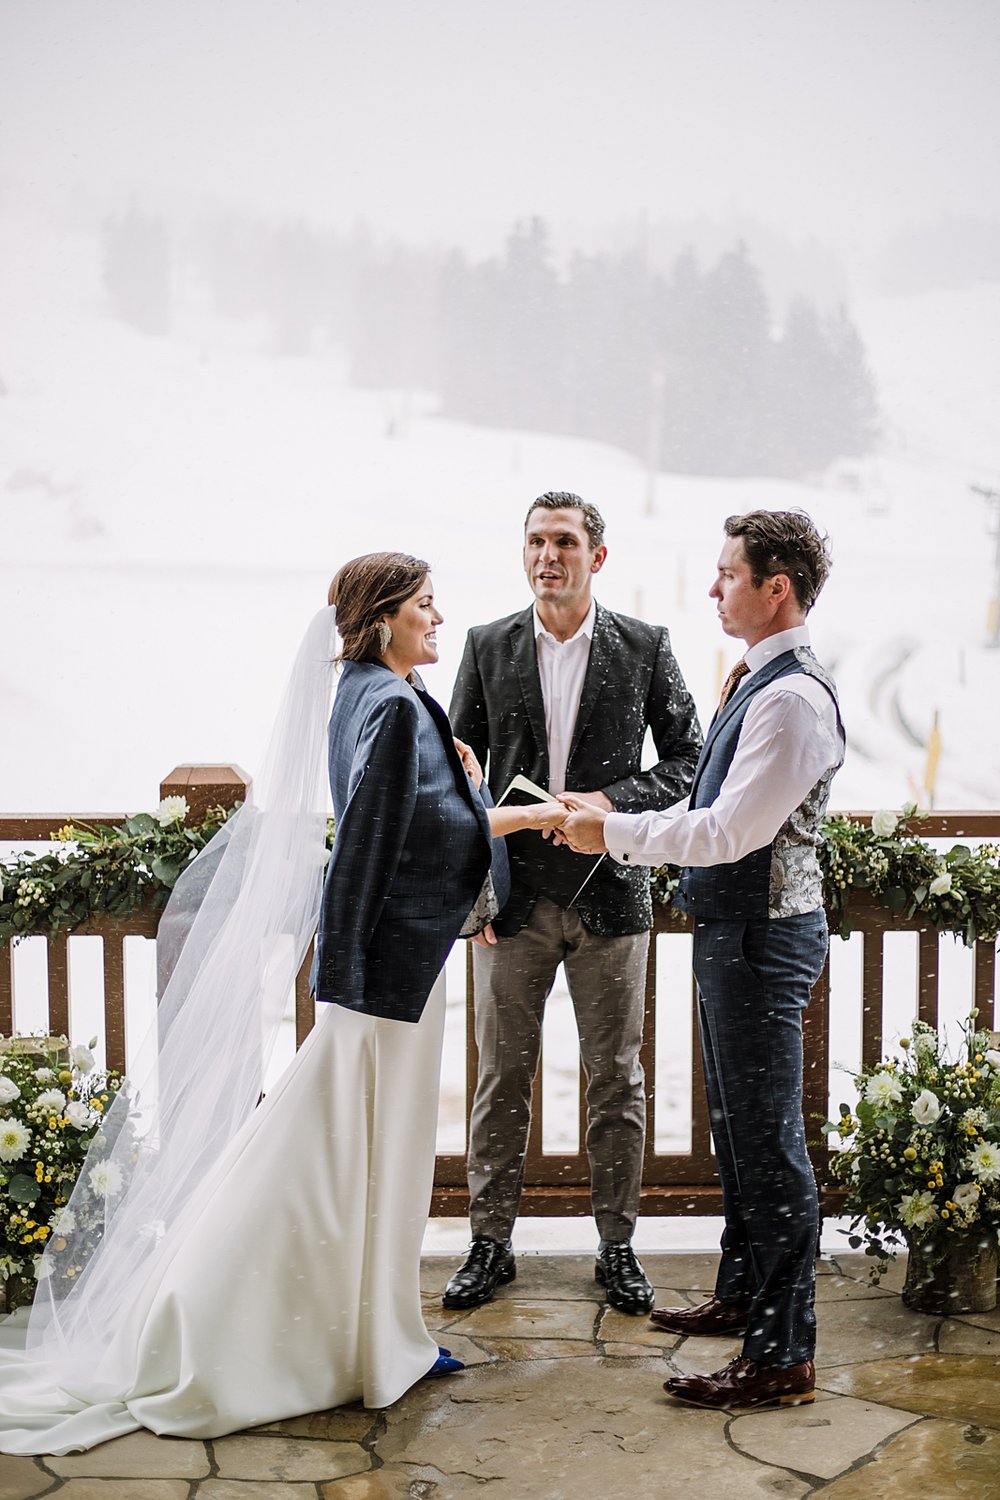 bride and groom sharing vows in the falling snow, groom giving his suit jacket to the bride, snowy wedding ceremony, sevens wedding, breckenridge sevens wedding, peak 8 wedding, blue wedding shoes